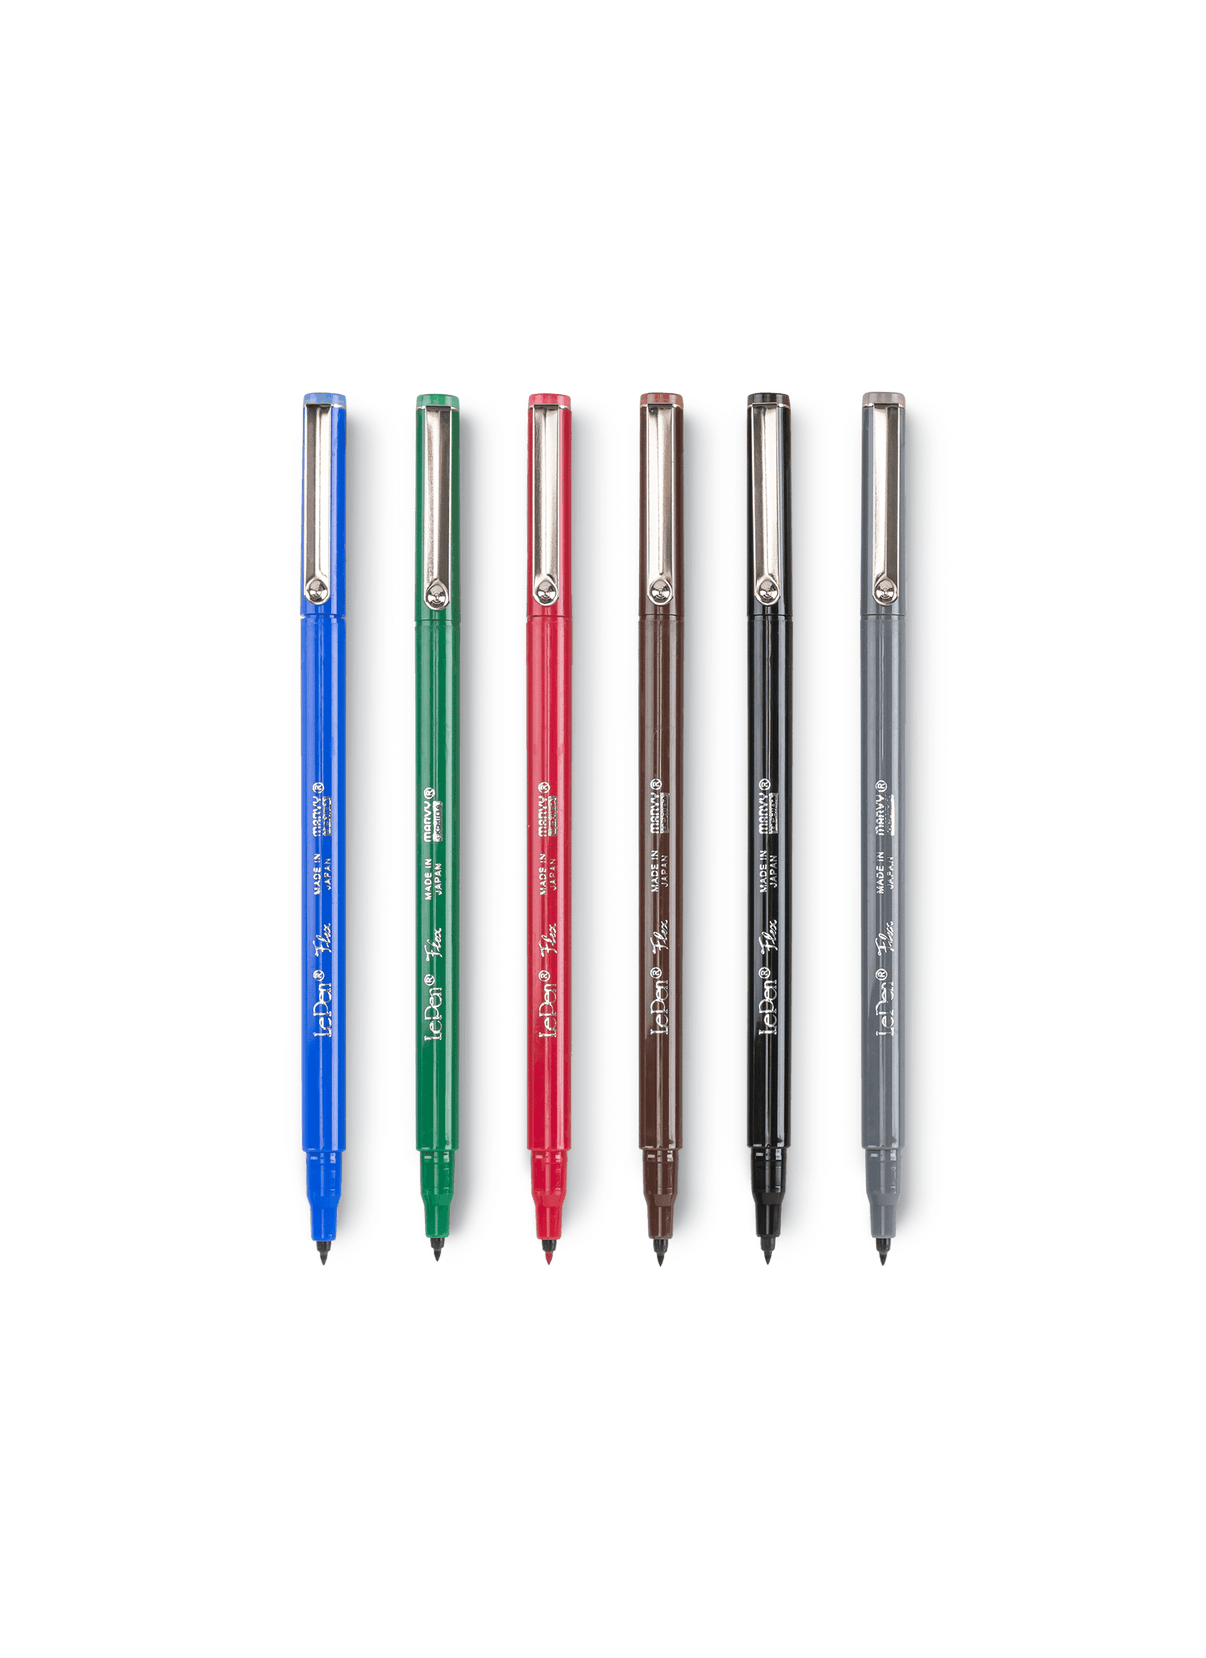 Le Pen Primary Flex Set including Blue, Green, Red, Brown, Black, and Dark Gray